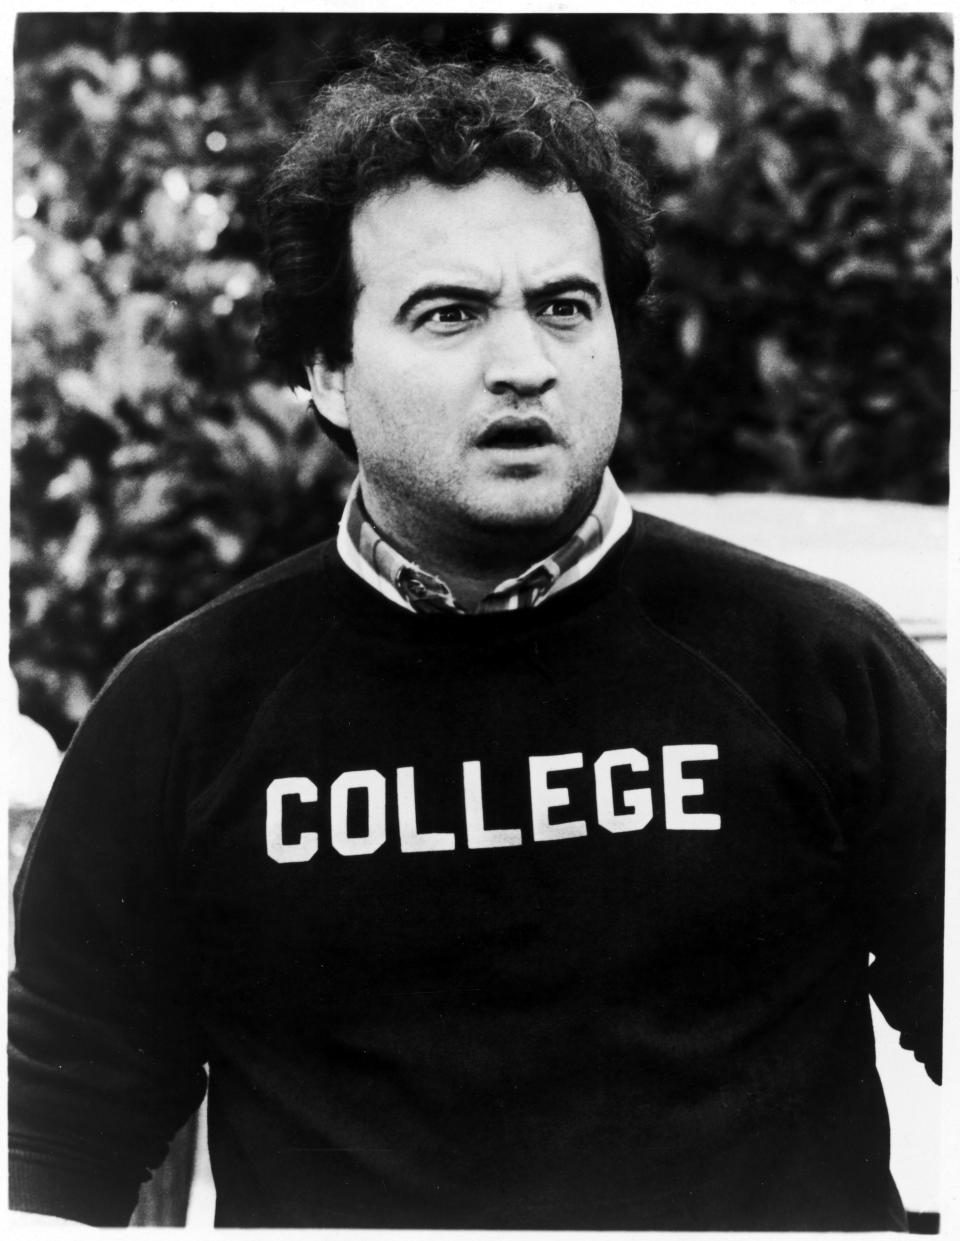 John Belushi in a scene from the film Animal House from 1974.